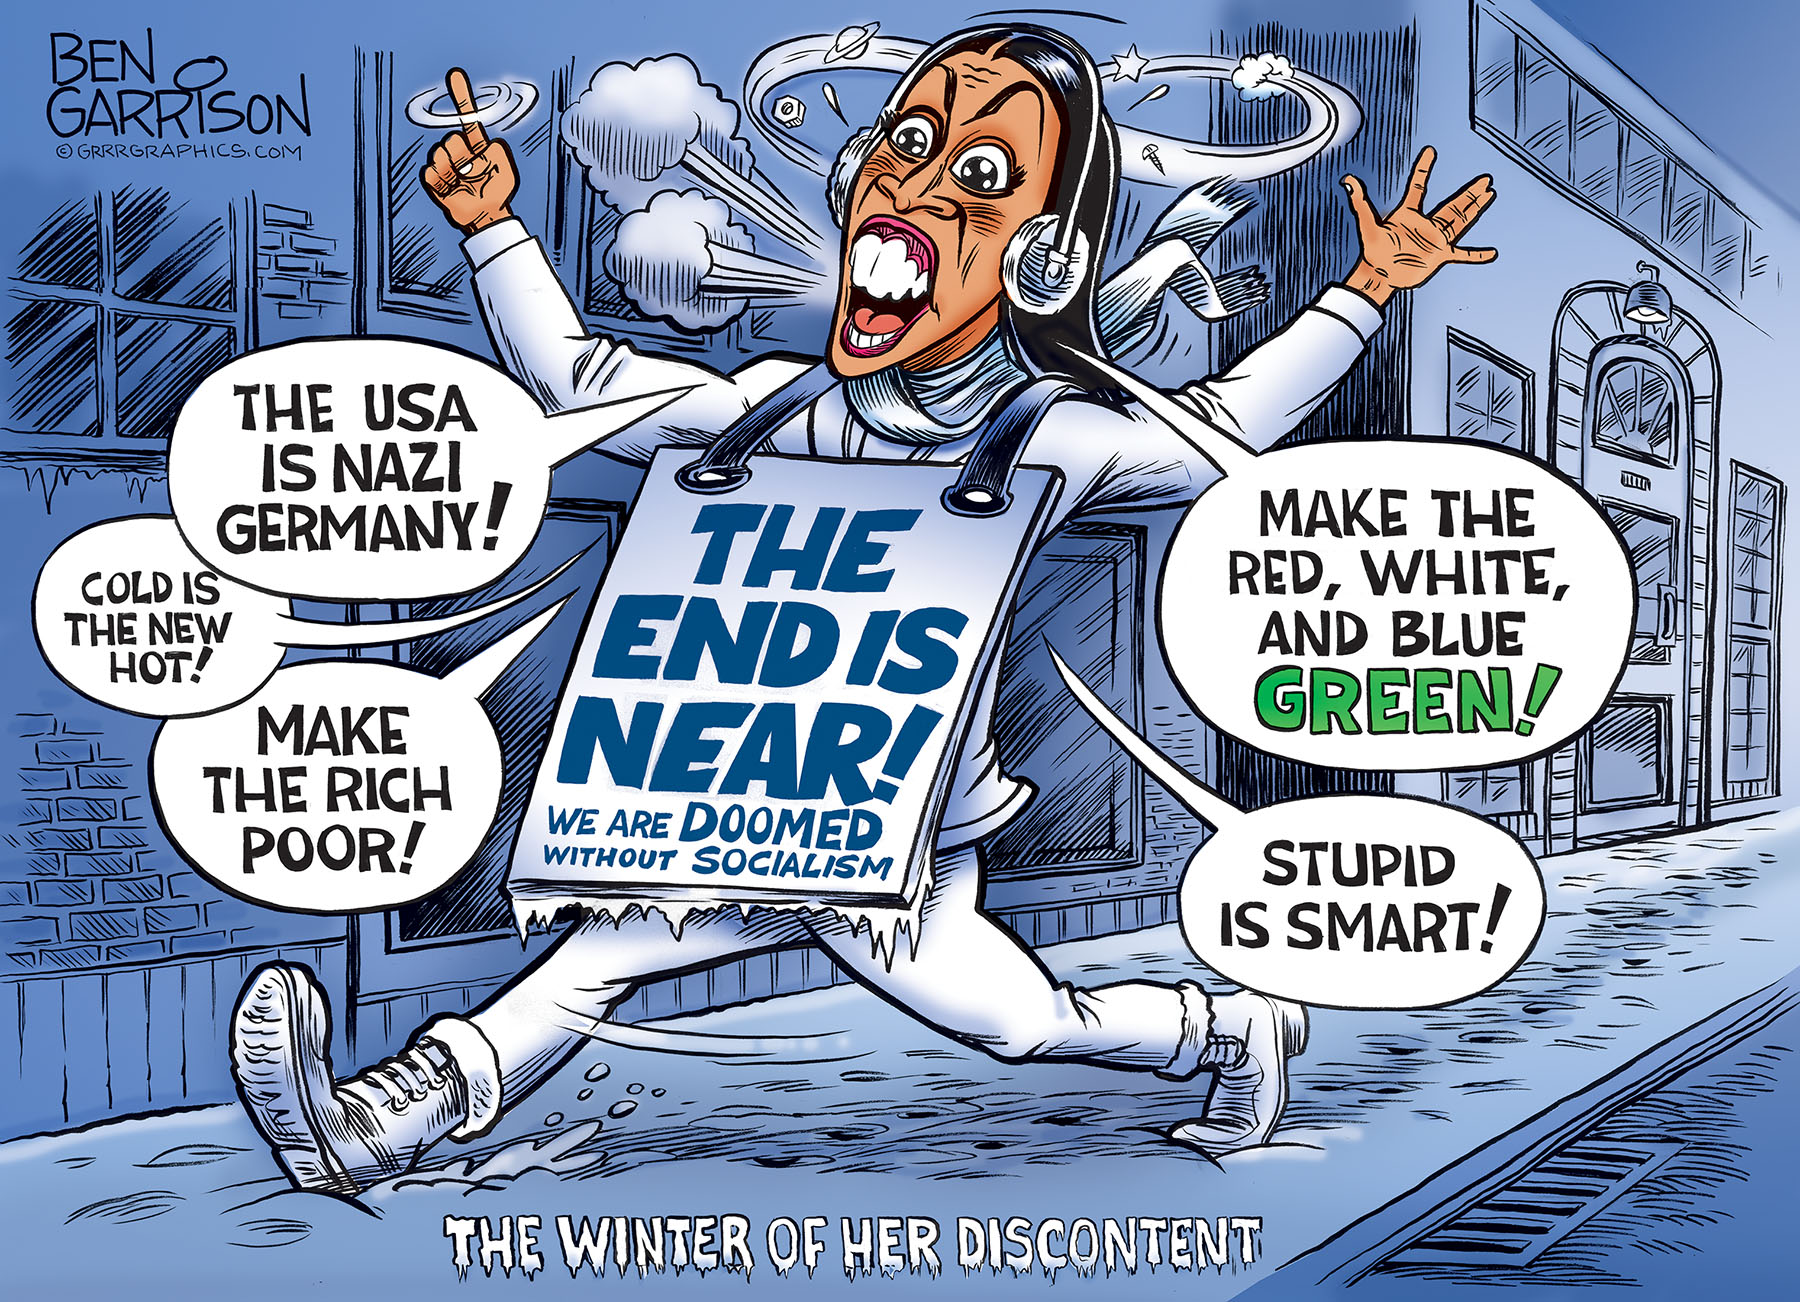 aoc cartoons - Ben Garrison Grrrgraphics.Com The Usa Is Nazi Germany! Cold Is The New Hot! Make The Rich We Are Doomed Poor! The Endis Neari Make The Red, White, And Blue Green! Without Socialism si Stupid Is Smart! Sta The Winter Of Her Discontent